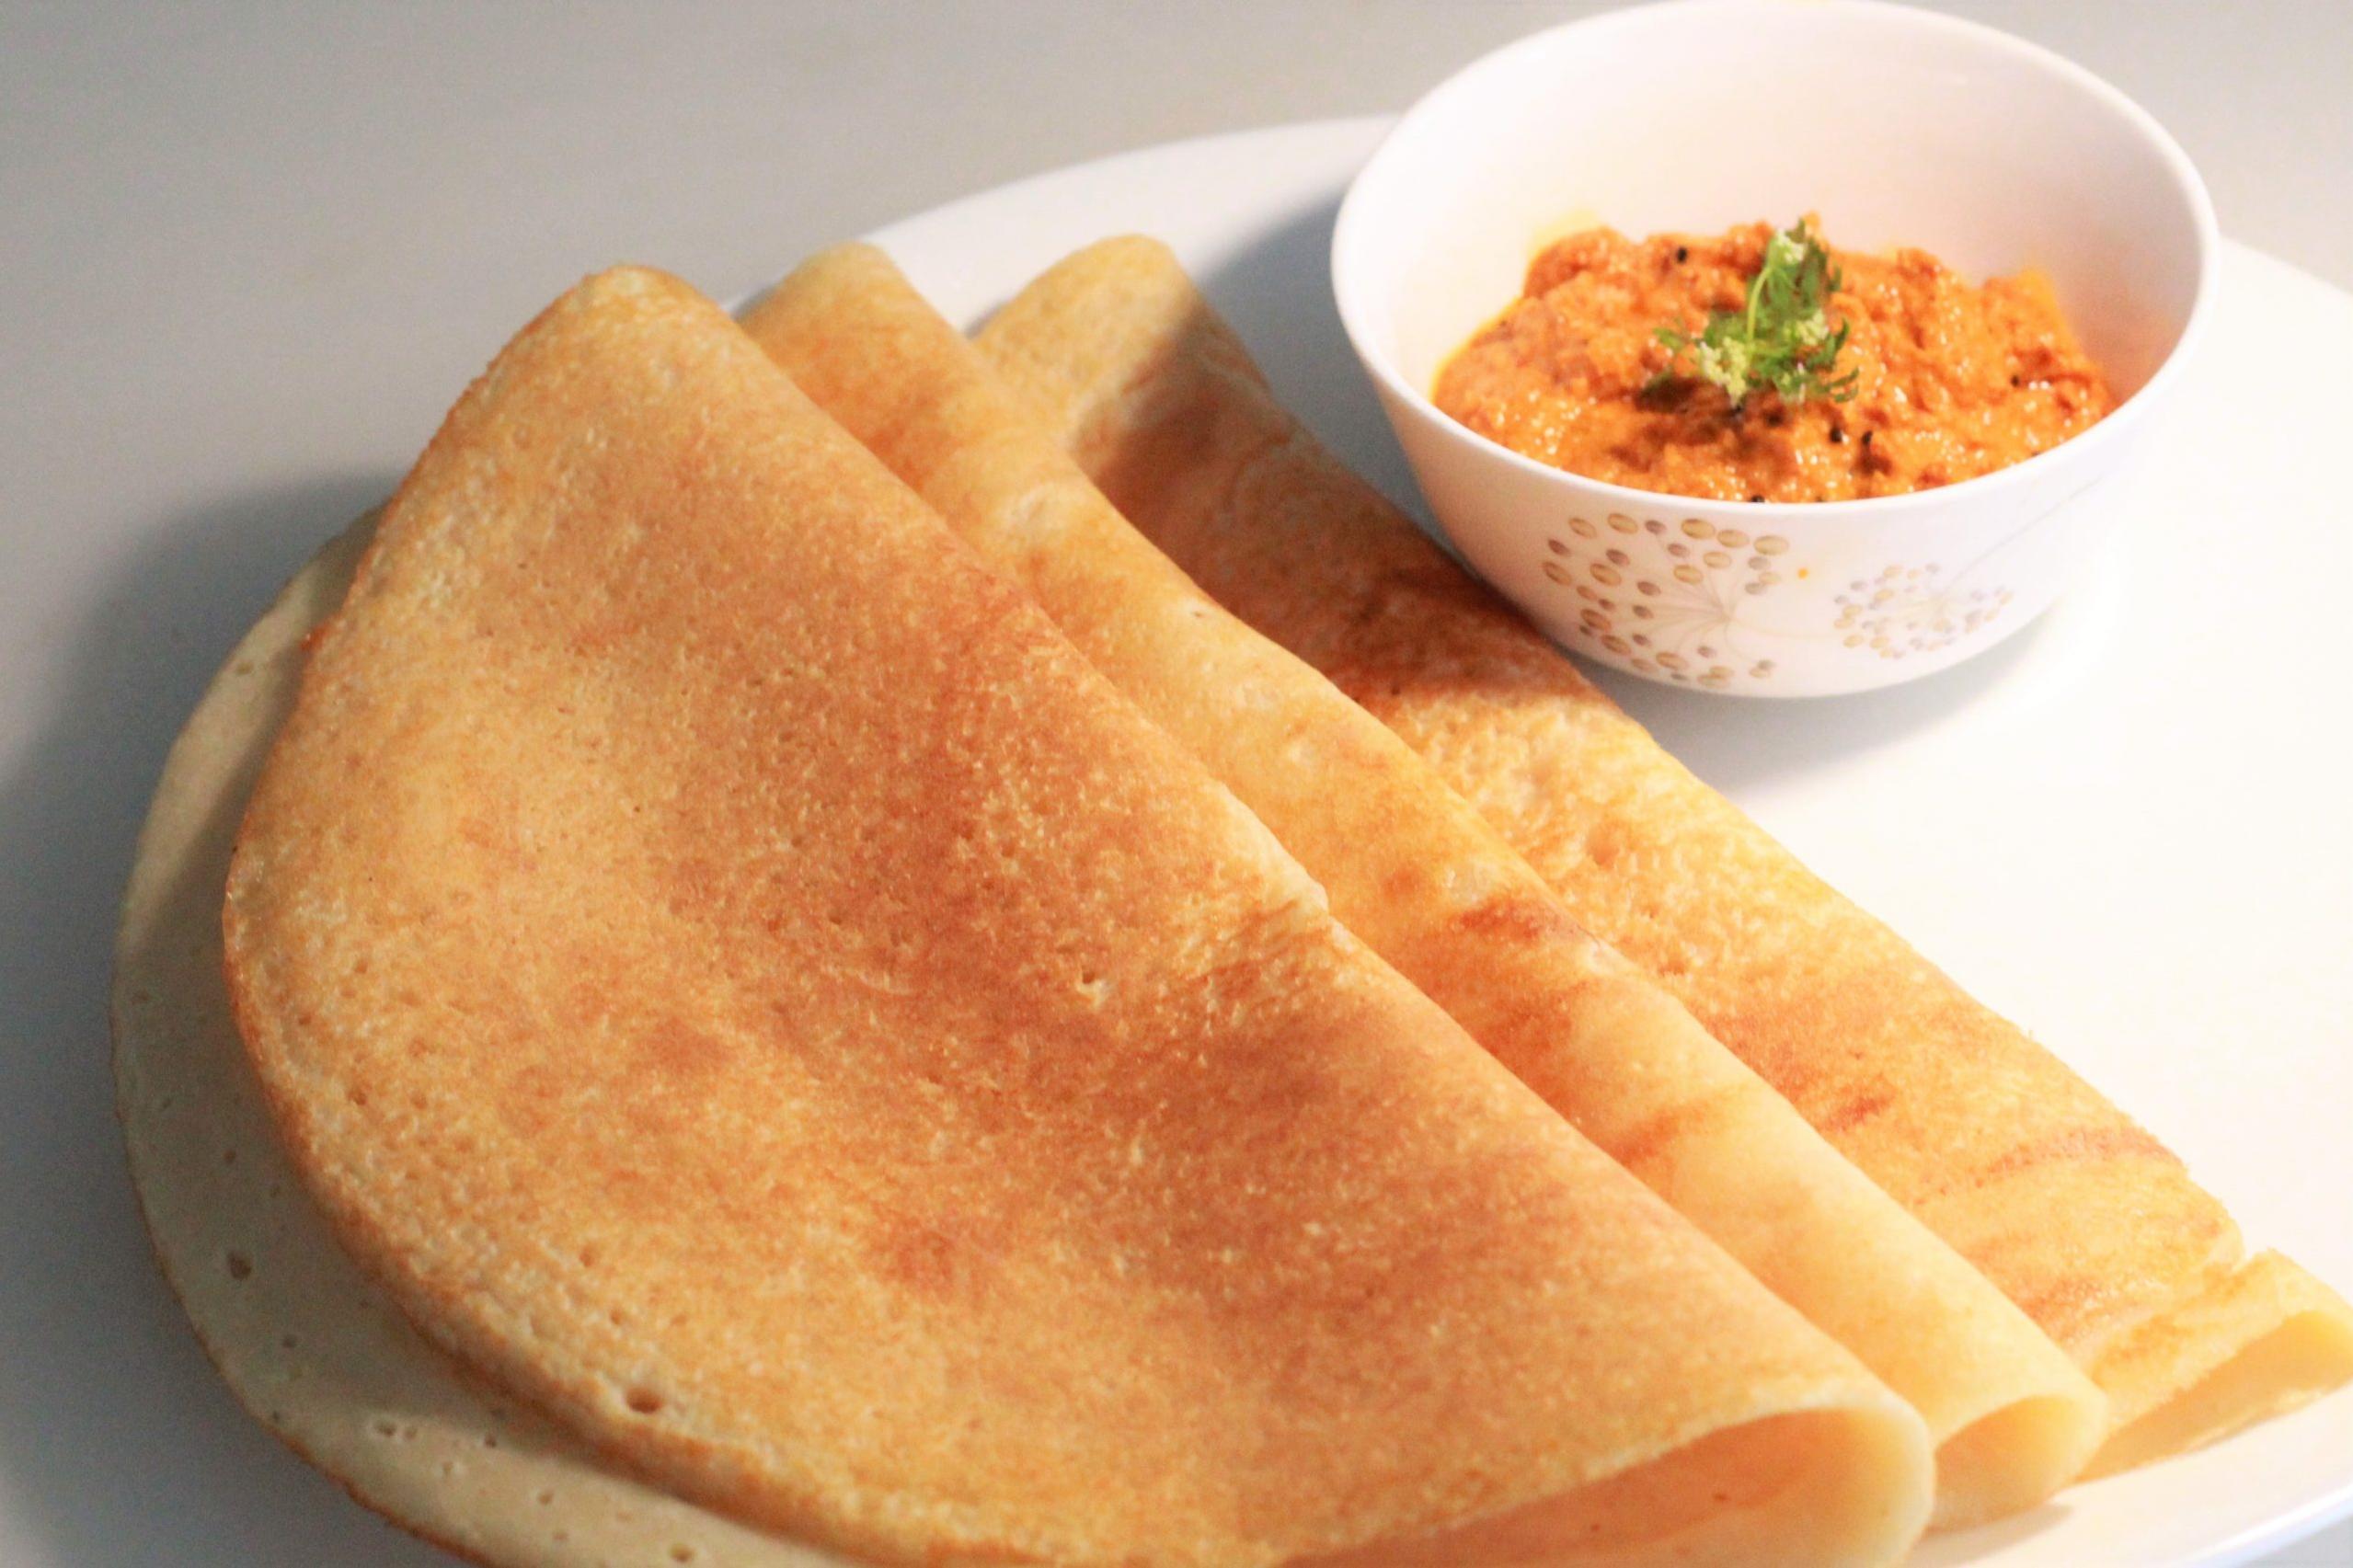  Put a twist on your traditional dosa with these protein-packed Red Lentil Dosas